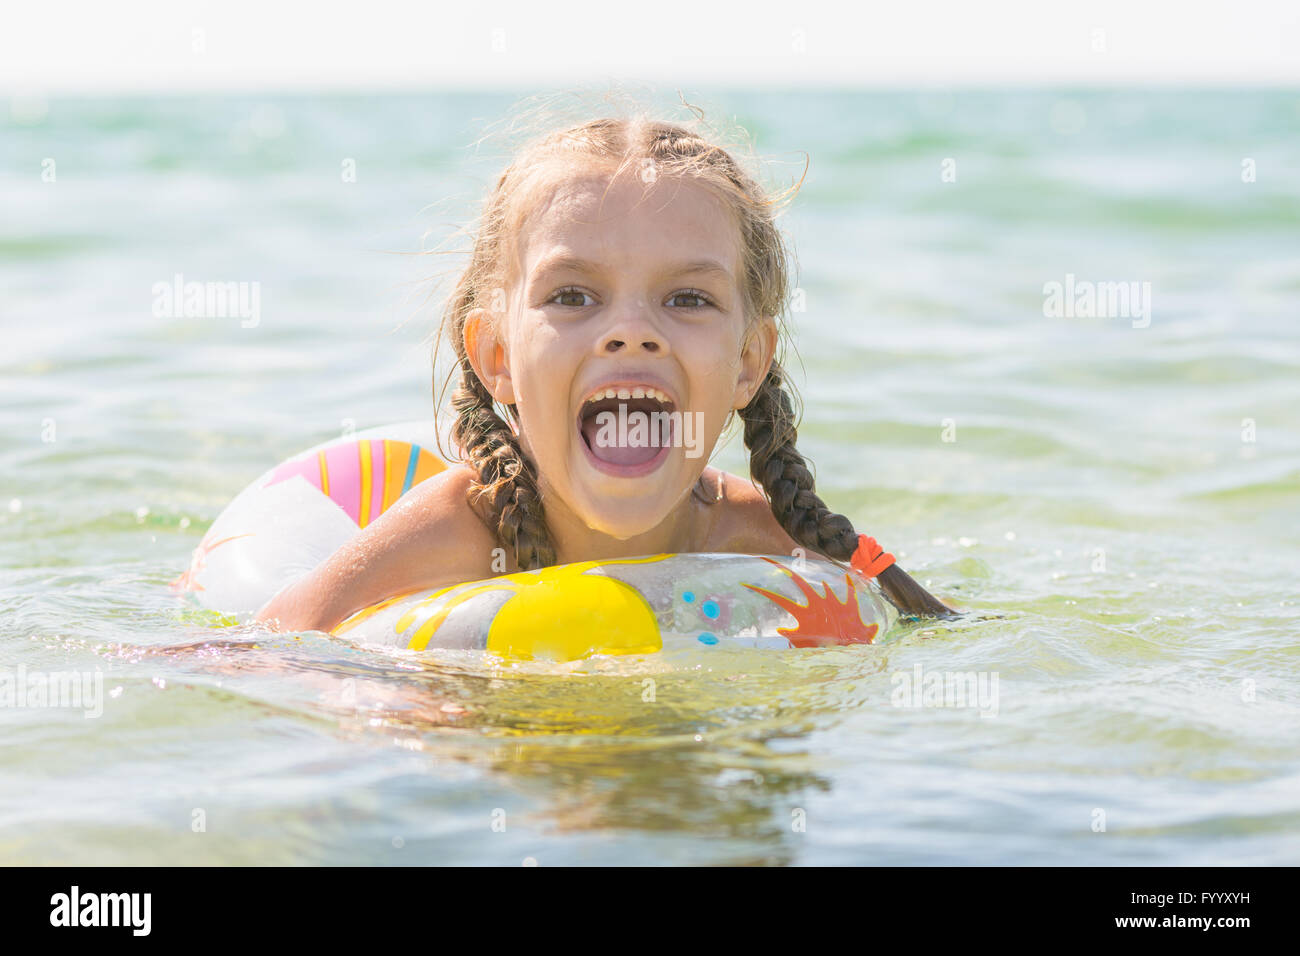 Six year old girl bathing in the sea with his mouth open in pleasure Stock Photo